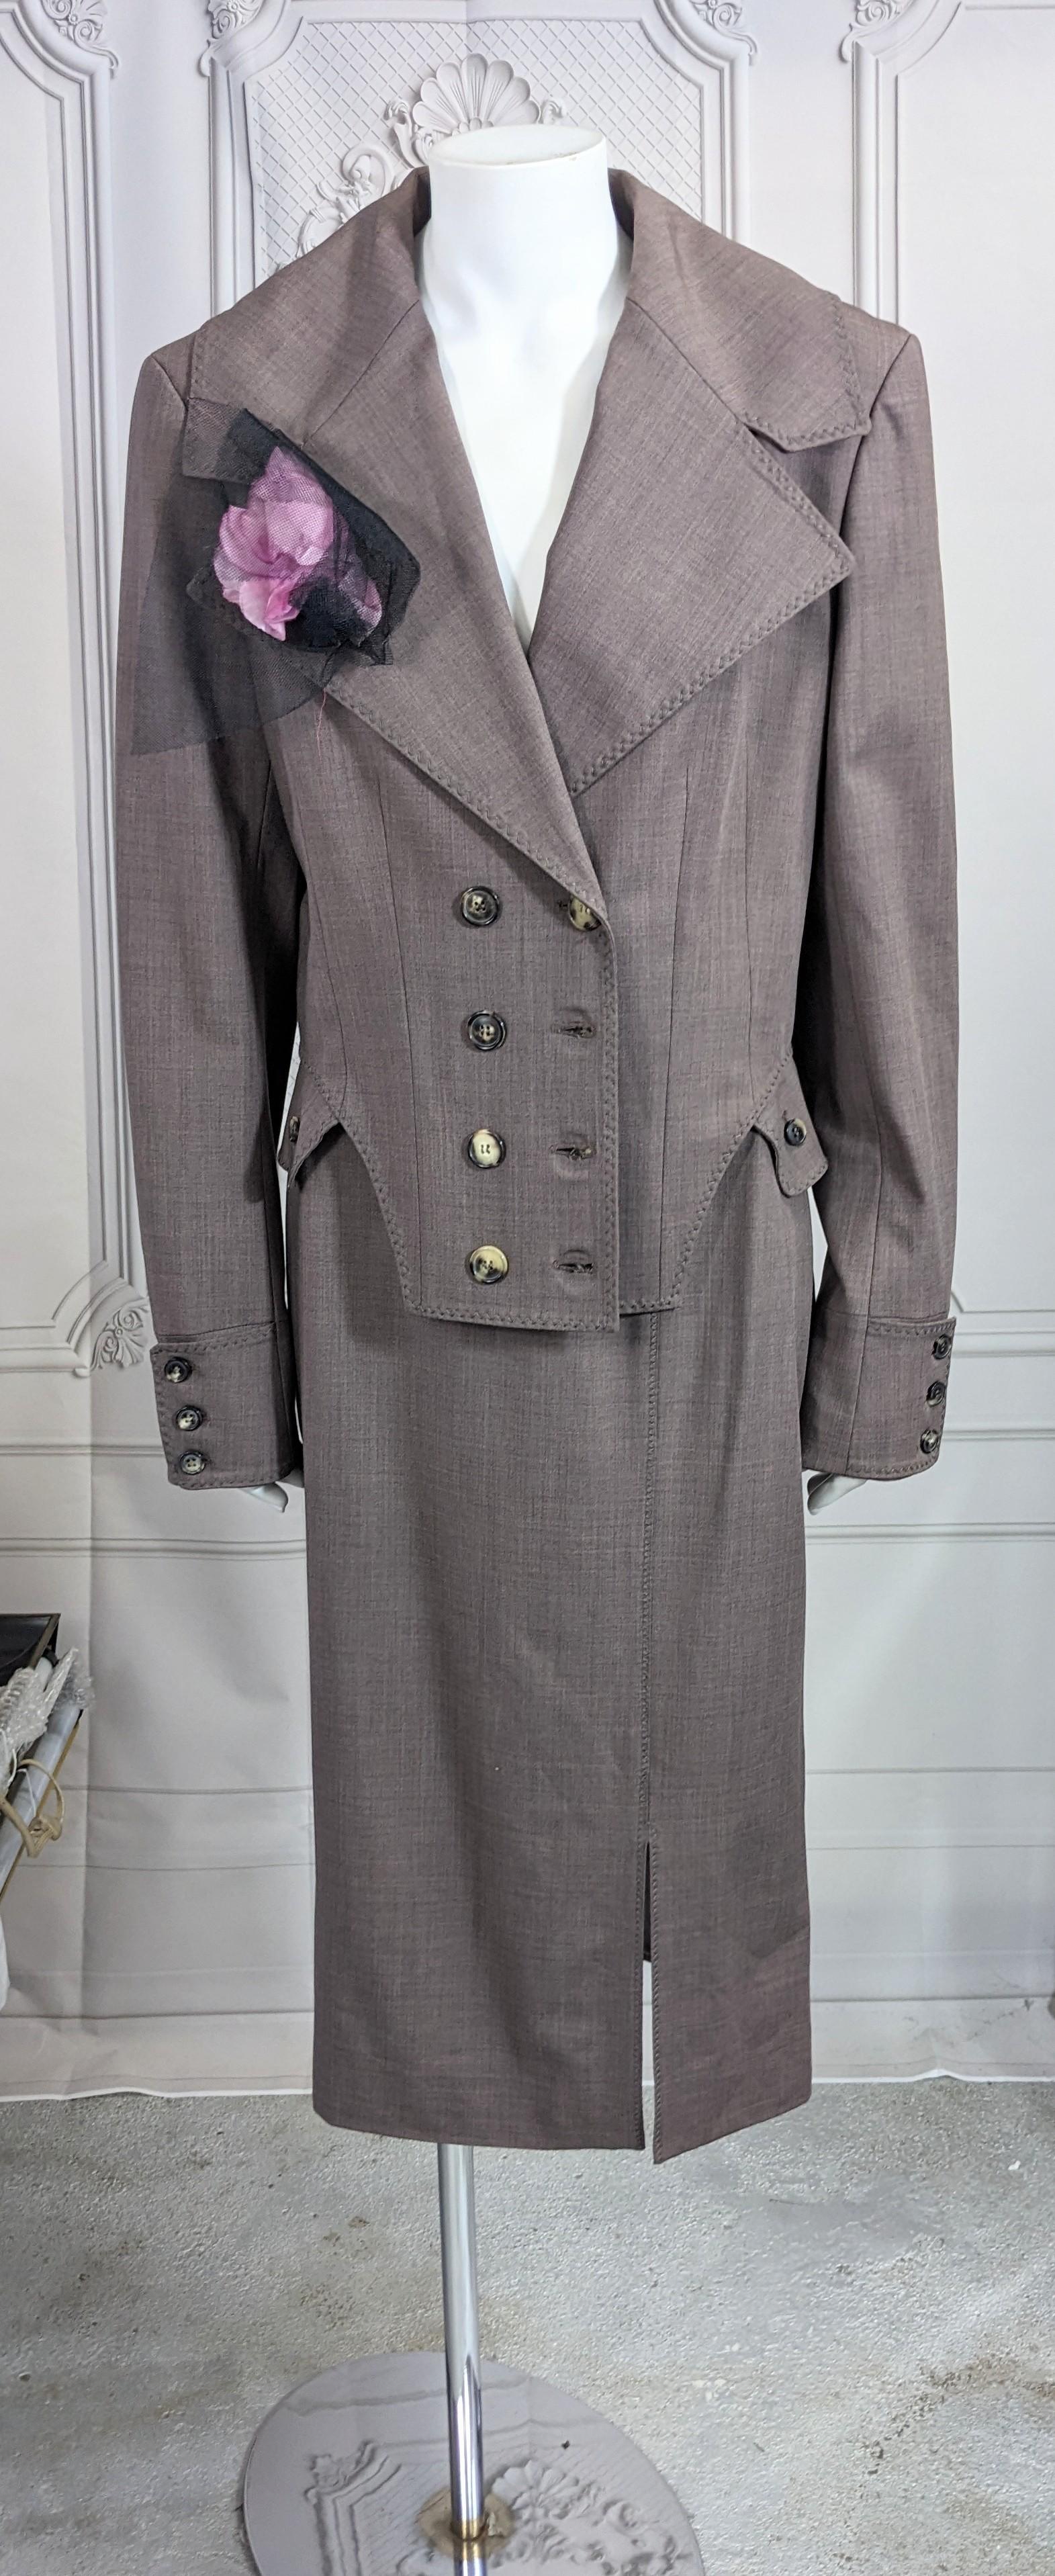 Women's John Galliano Heathered Wool Two Piece Suit S/S 2001 For Sale